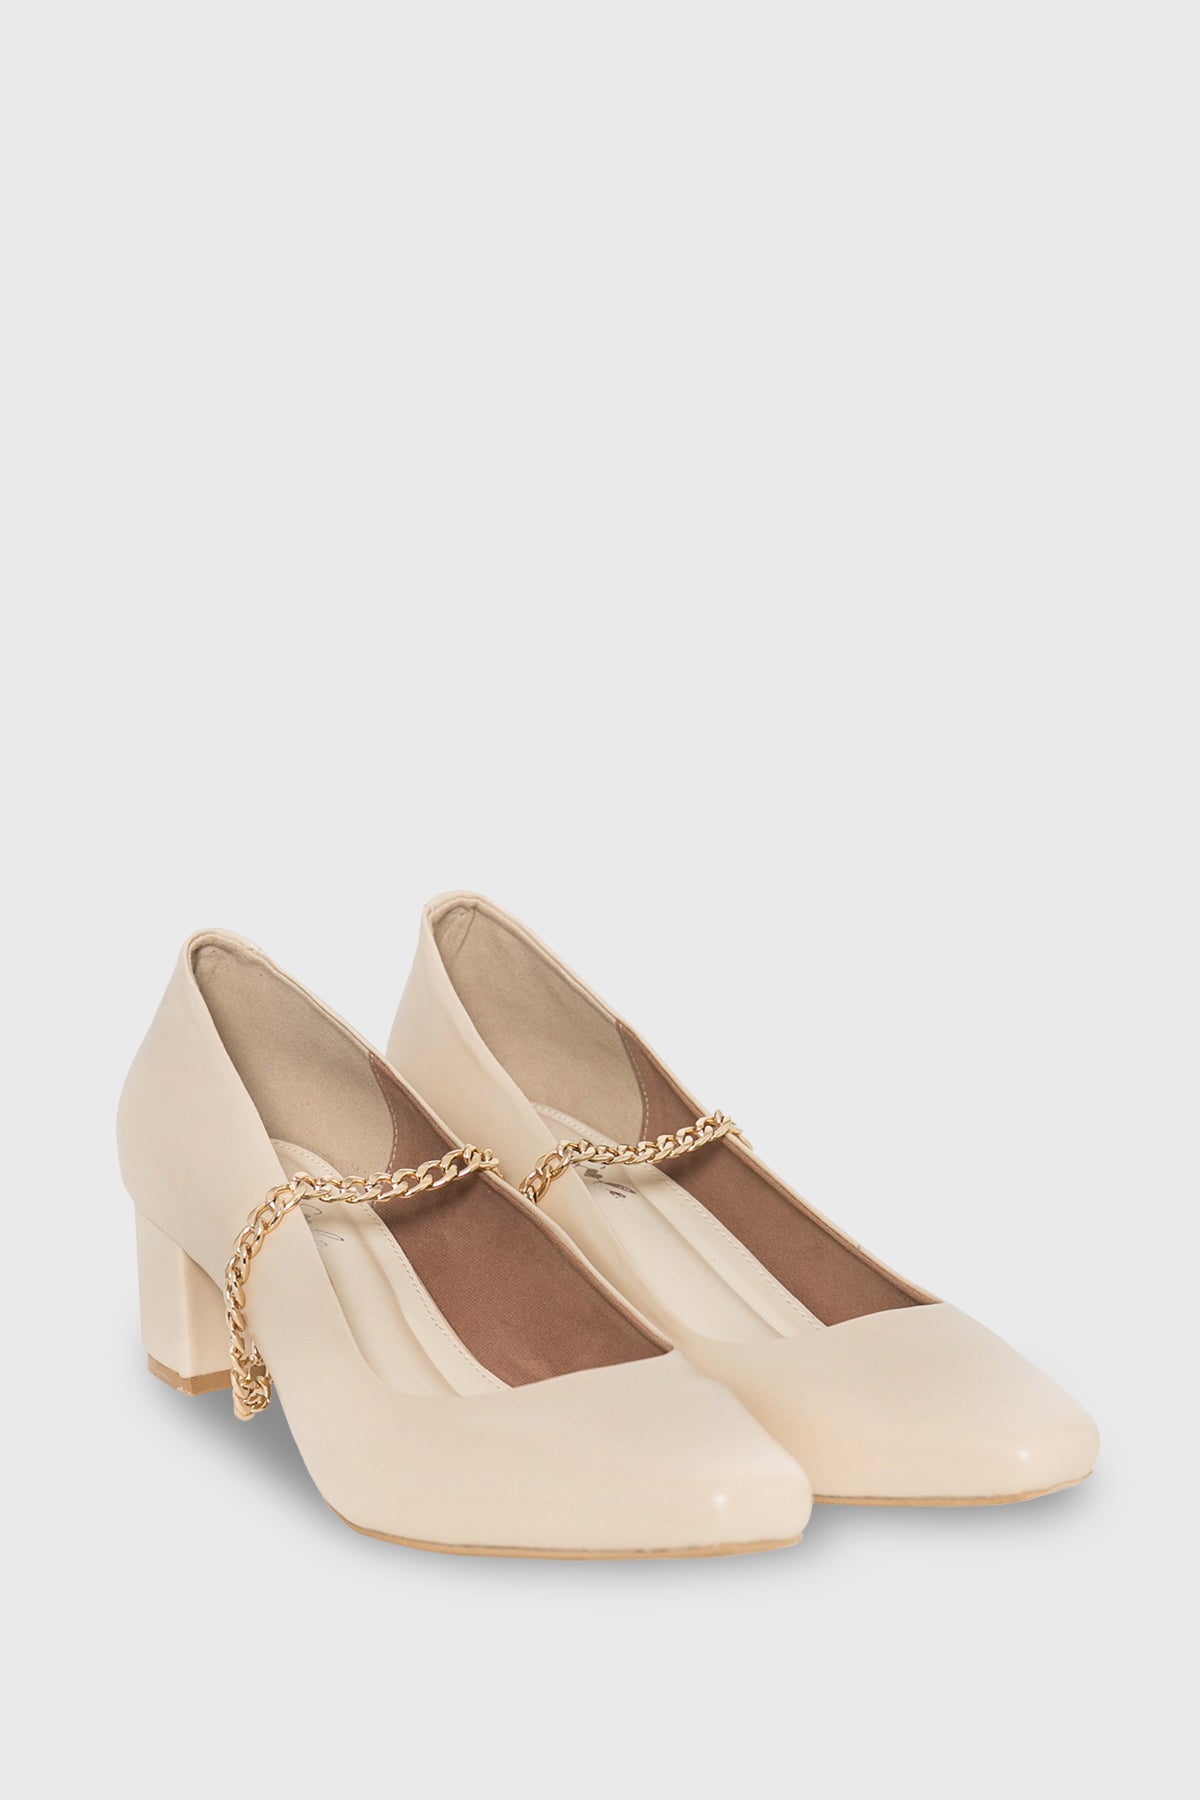 Liberty Shoes With Chain in Cream